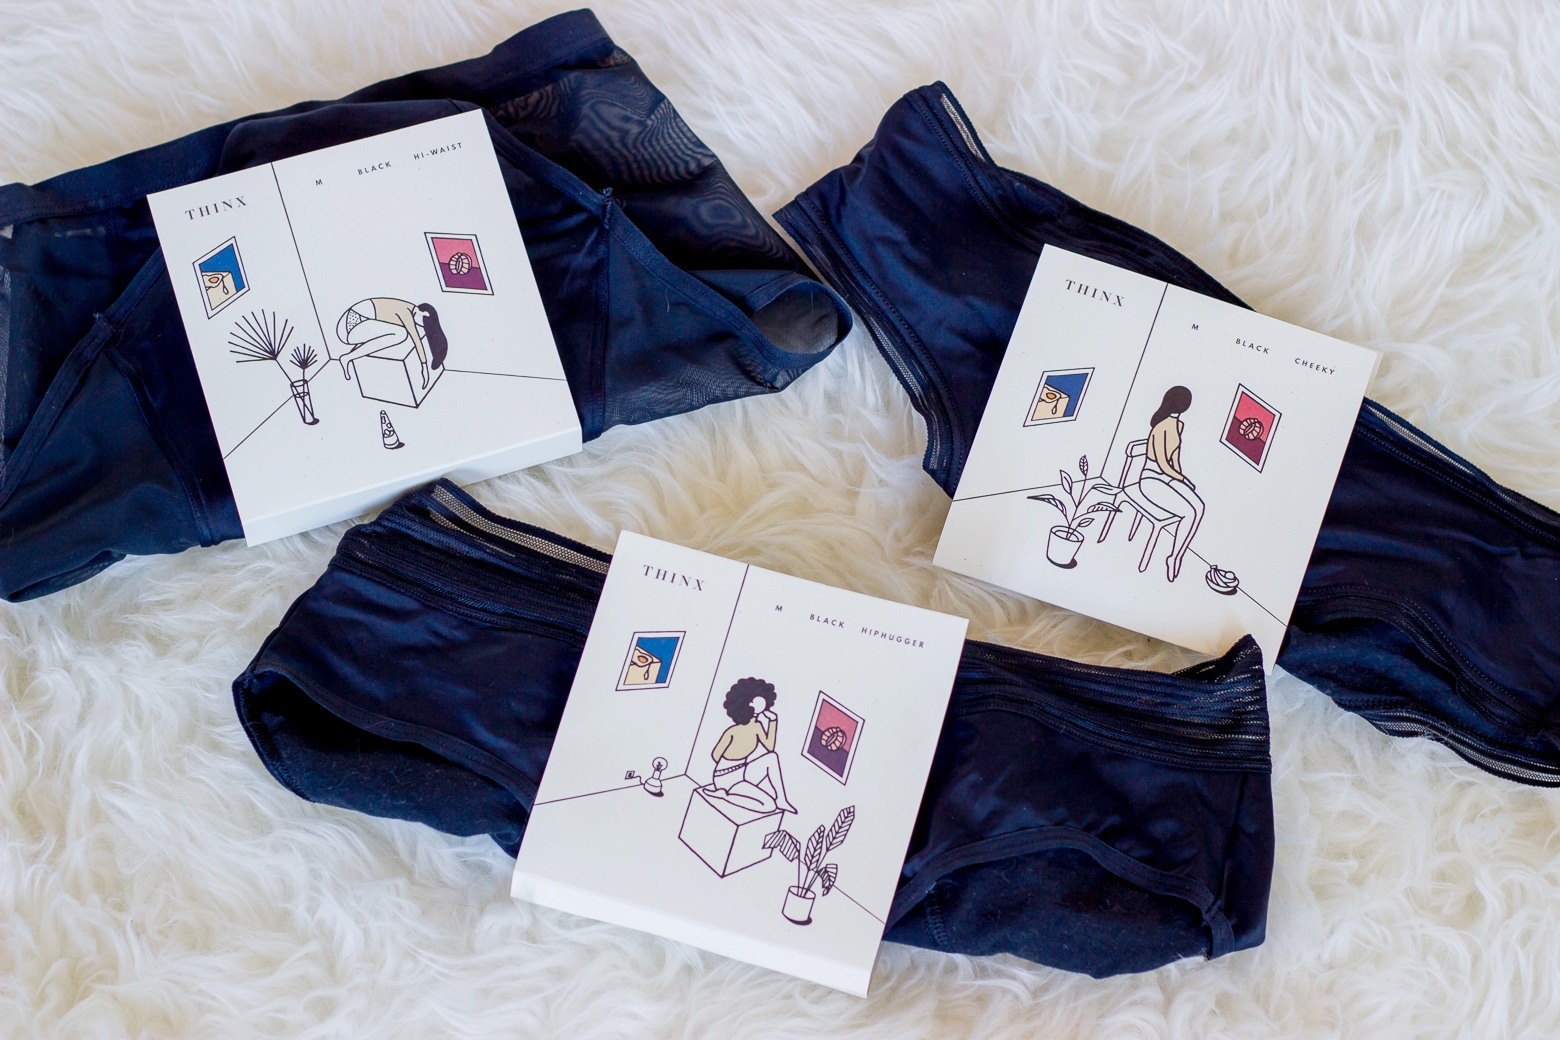 Thinx Period-Proof Underwear Review: Do They Really Work?